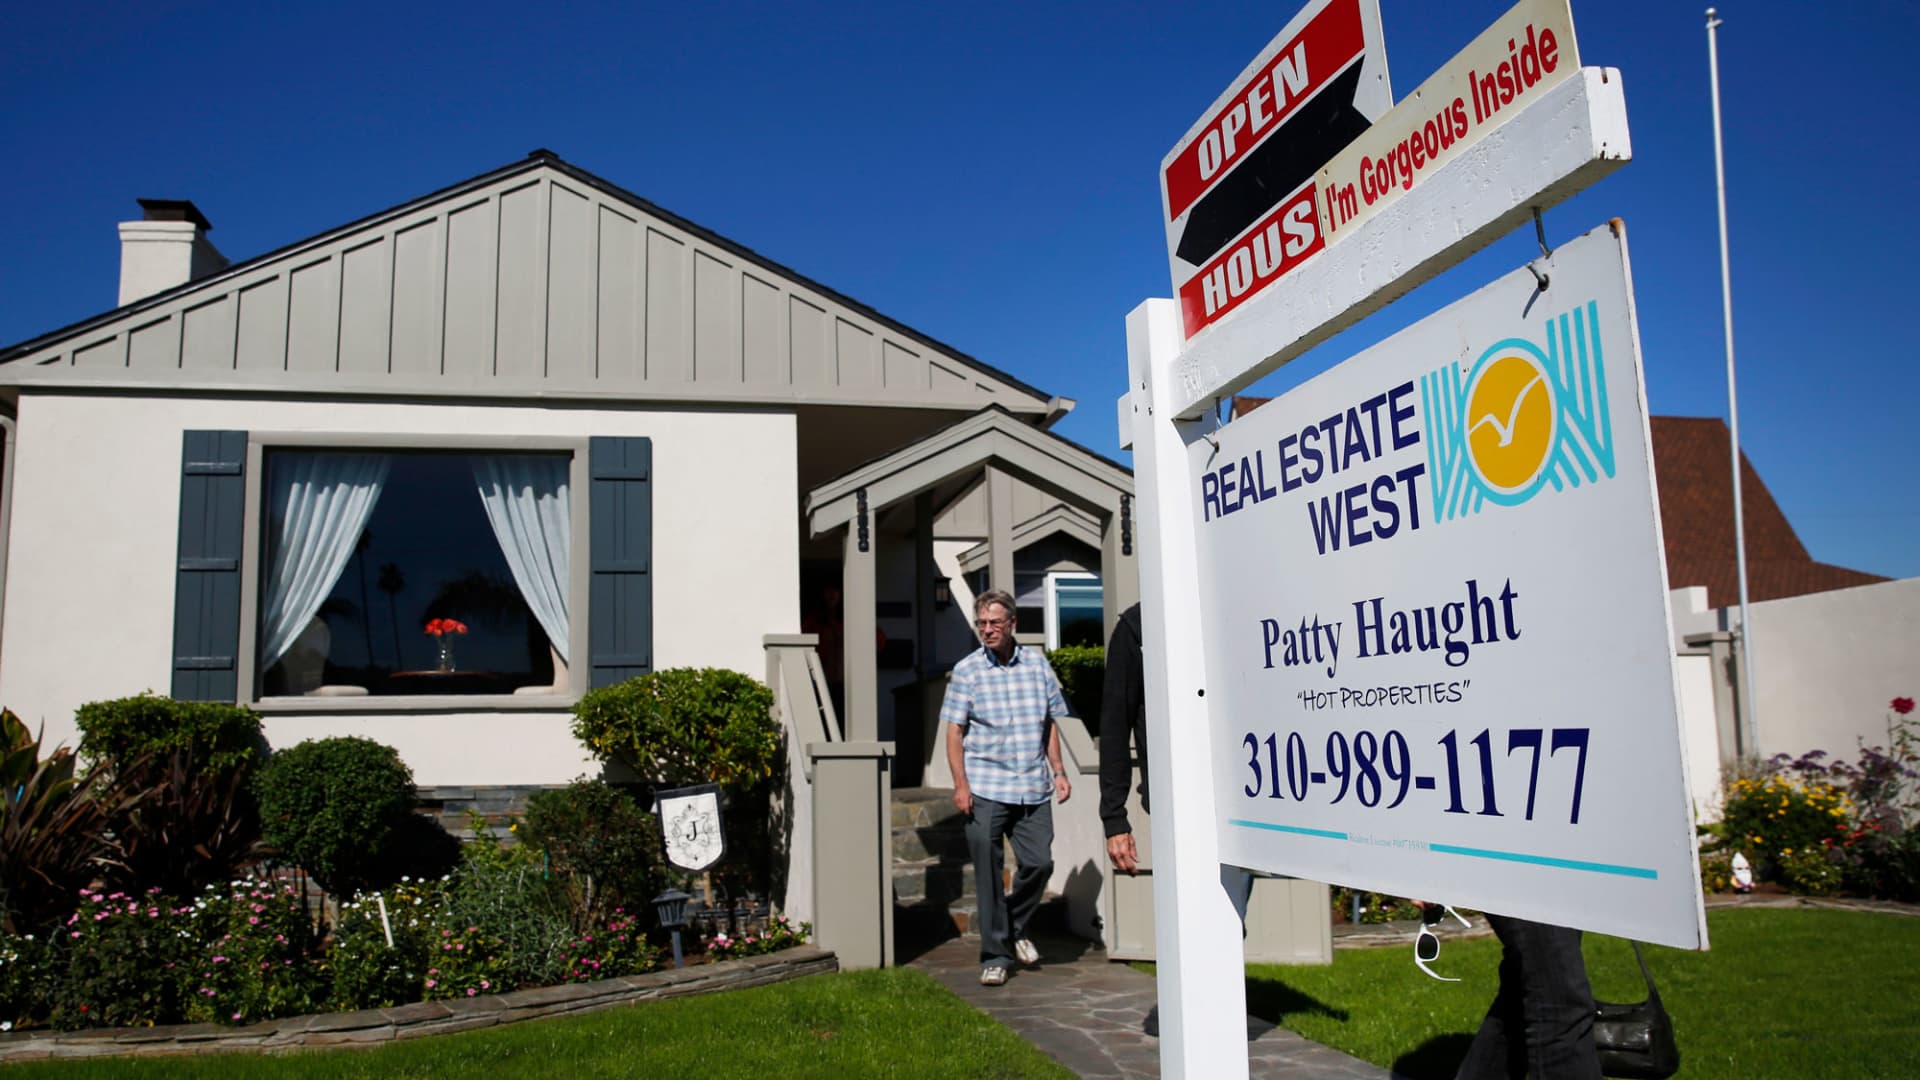 If thinking about an adjustable rate mortgage, consider the risks